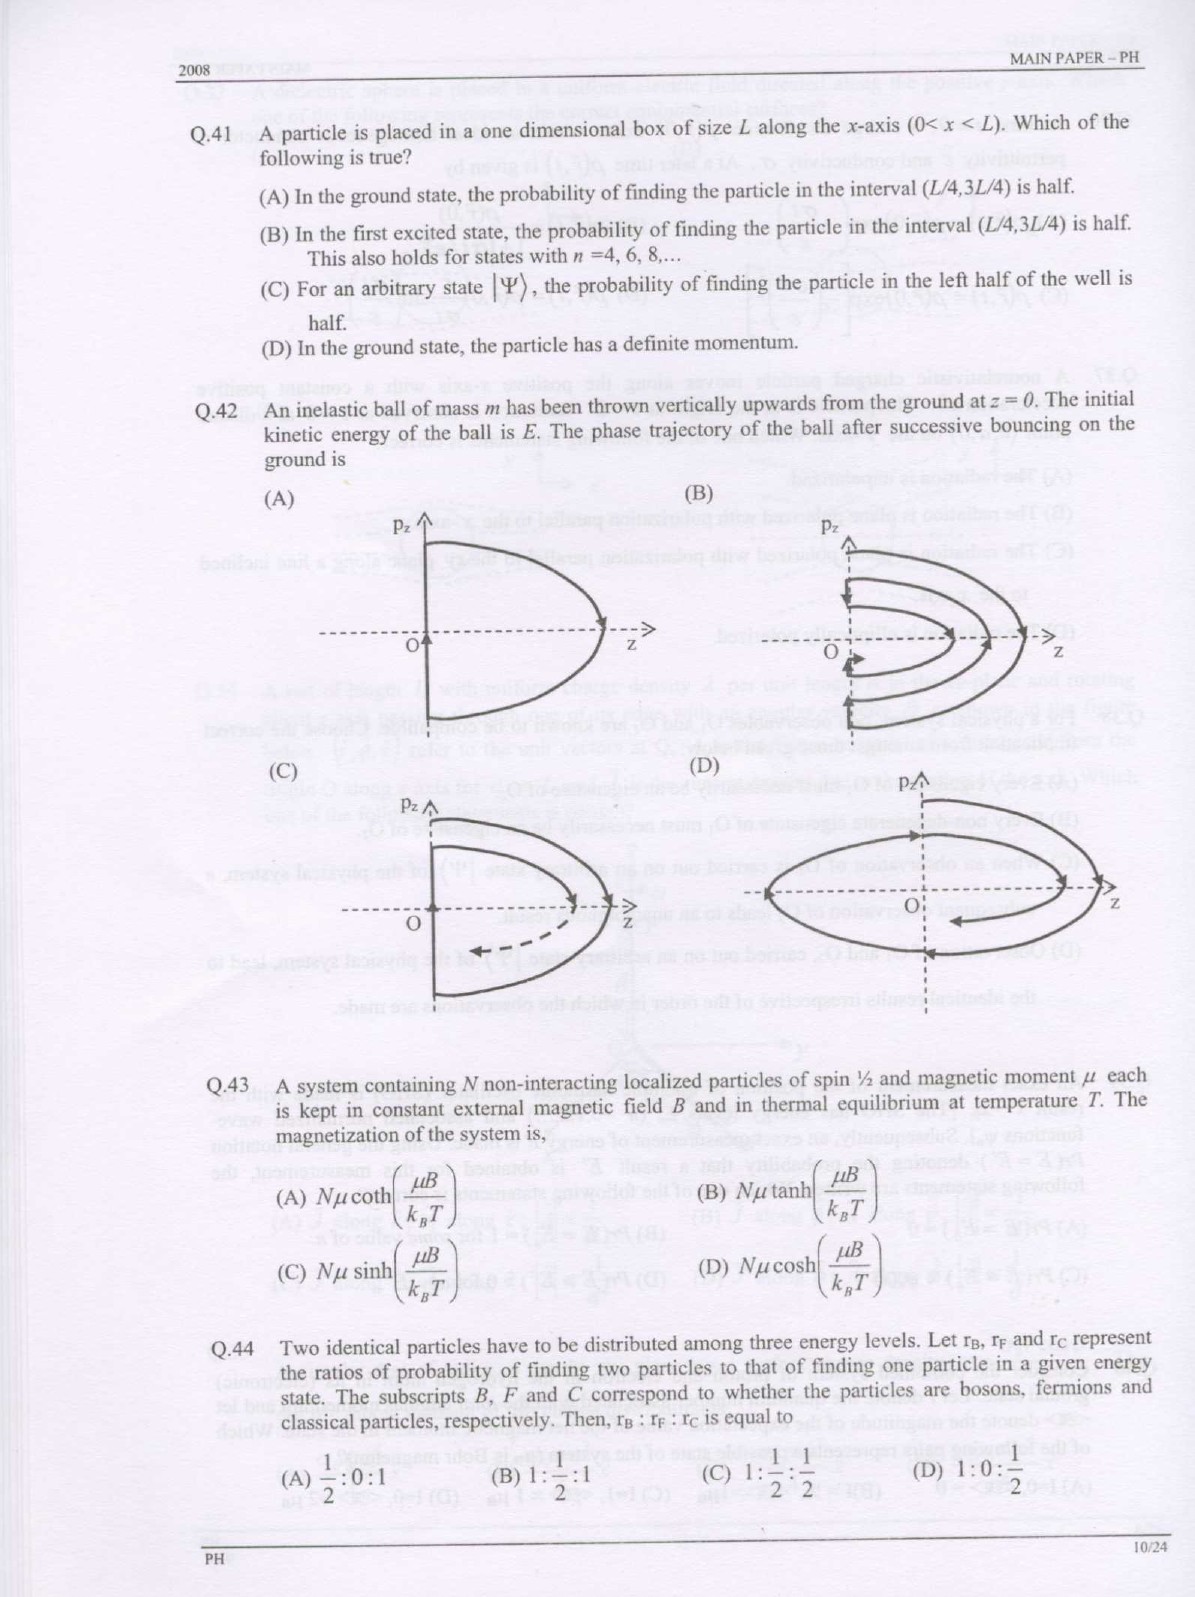 GATE Exam Question Paper 2008 Physics 10